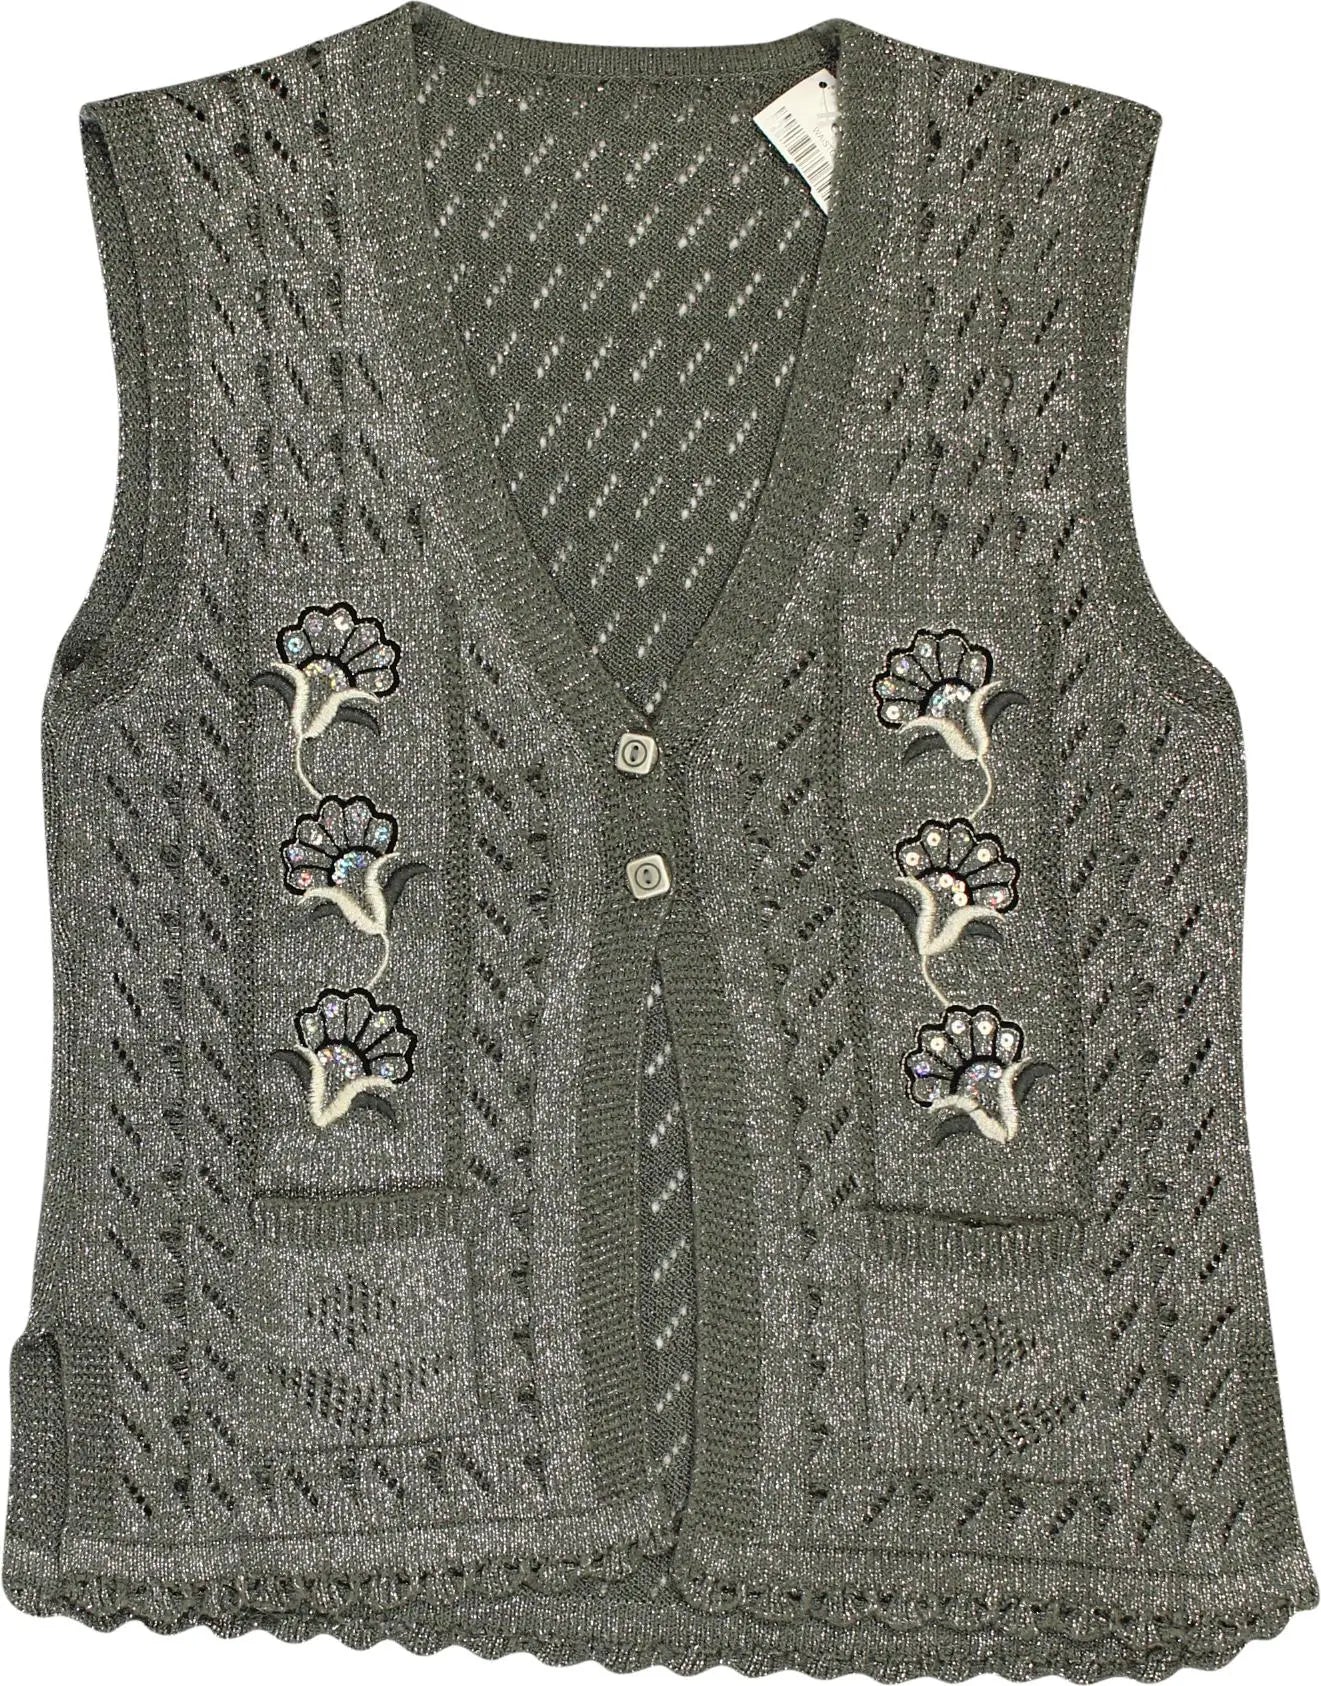 Unknown - Vest- ThriftTale.com - Vintage and second handclothing